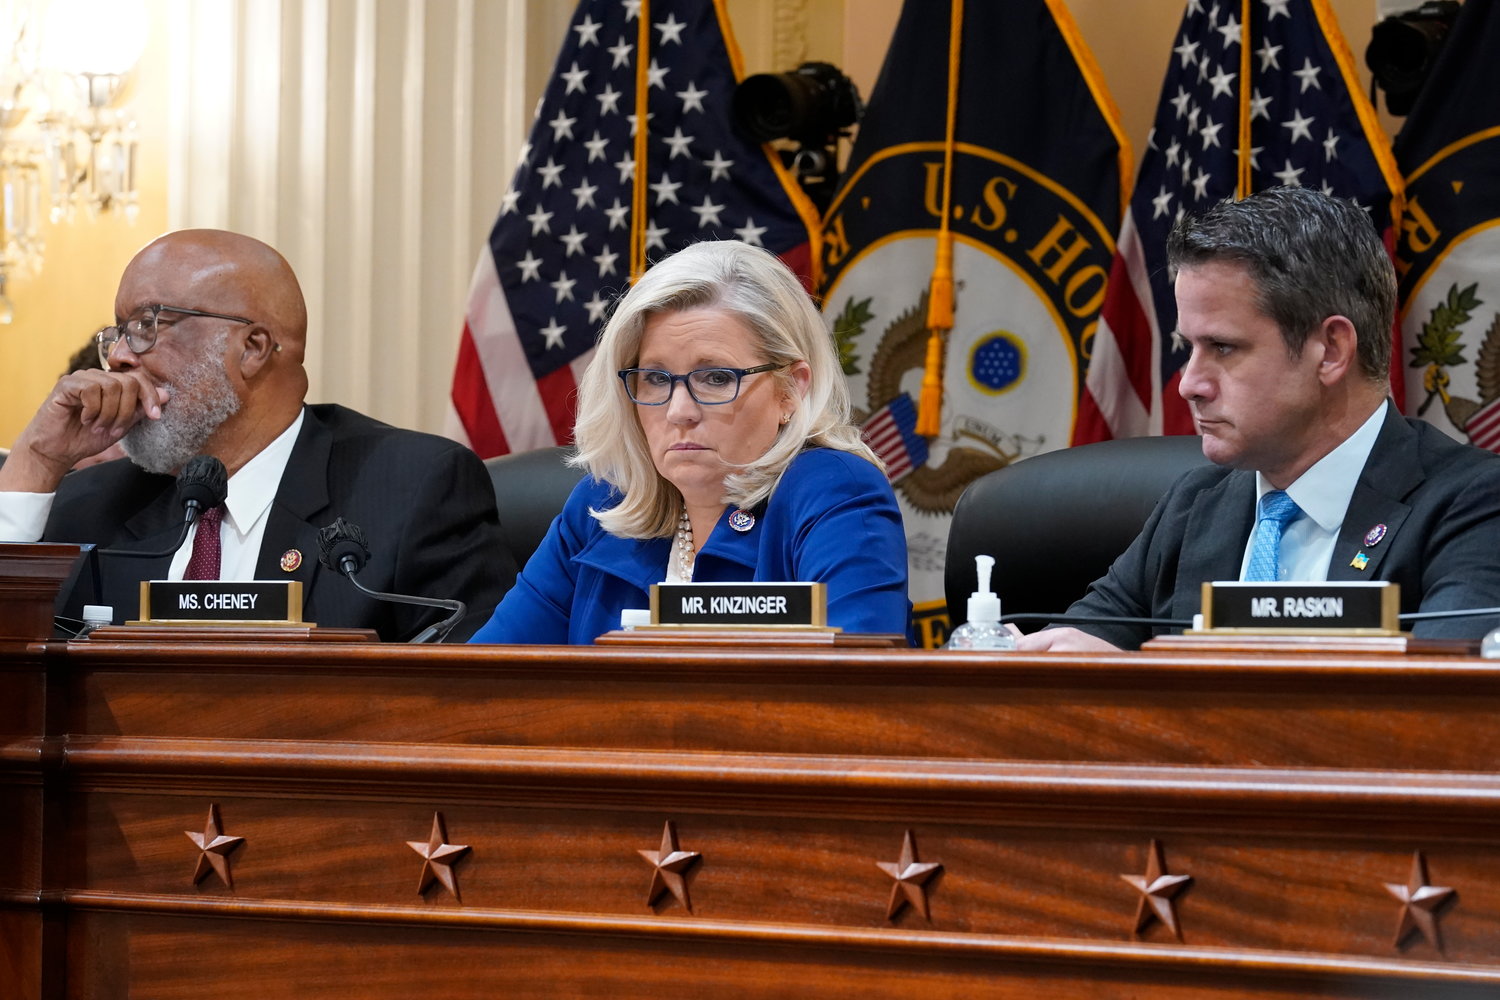 From left, Chairman Bennie Thompson, D-Miss., Vice Chair Liz Cheney, R-Wyo., and Rep. Adam Kinzinger, R-Ill., listen as Arizona House Speaker Rusty Bowers testifies with Georgia Secretary of State Brad Raffensperger and Georgia Deputy Secretary of State Gabriel Sterling, before the House select committee investigating the Jan. 6 attack on the U.S. Capitol, at the Capitol in Washington, Tuesday, June 21, 2022. (AP Photo/J. Scott Applewhite)